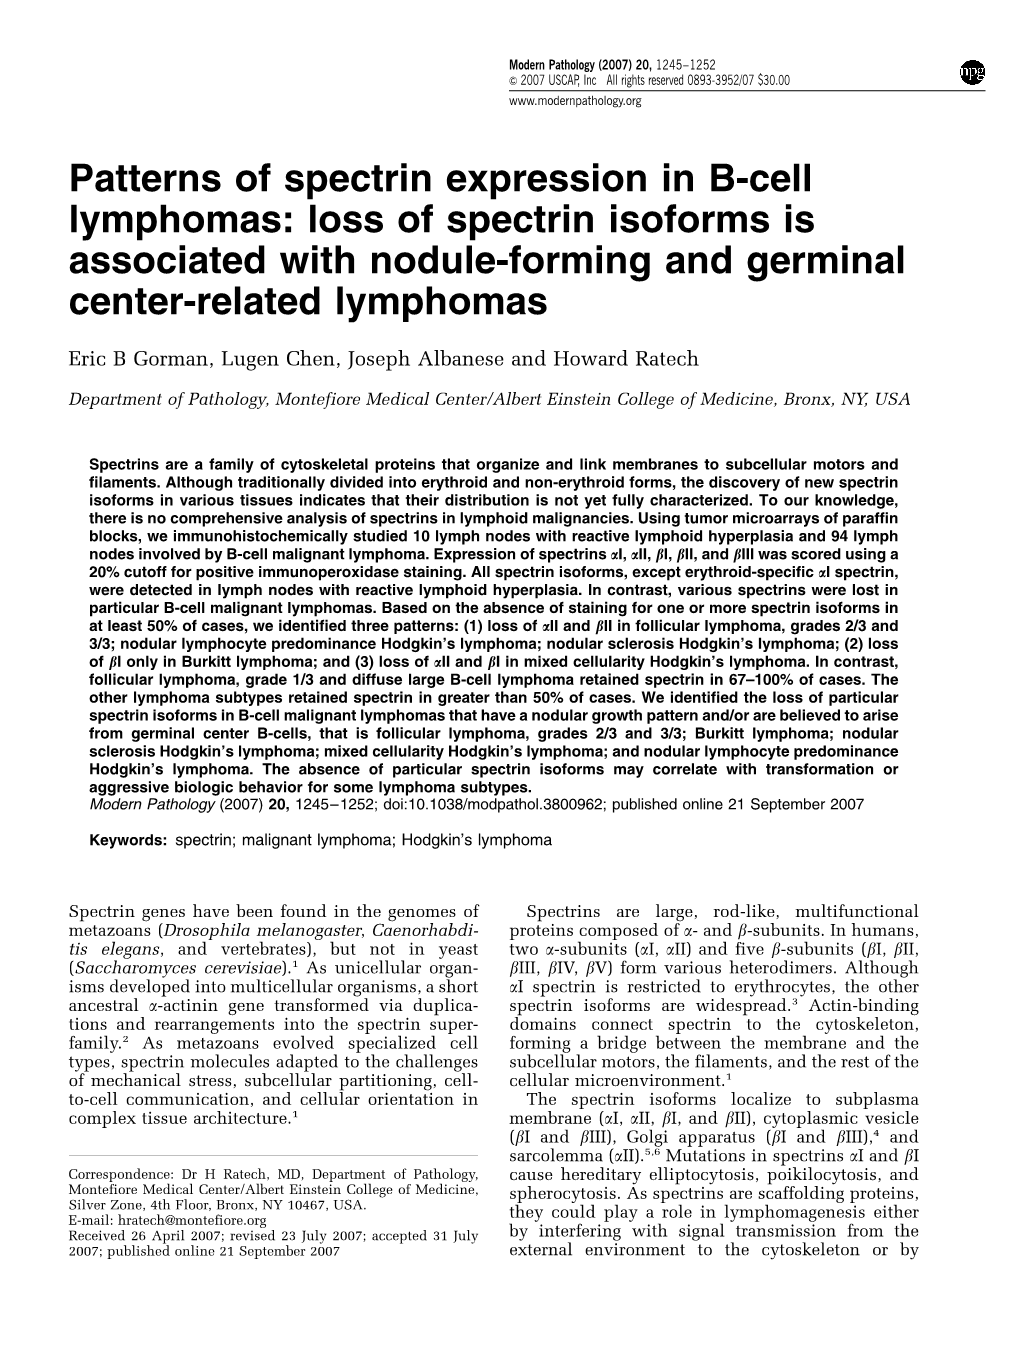 Patterns of Spectrin Expression in B-Cell Lymphomas: Loss of Spectrin Isoforms Is Associated with Nodule-Forming and Germinal Center-Related Lymphomas